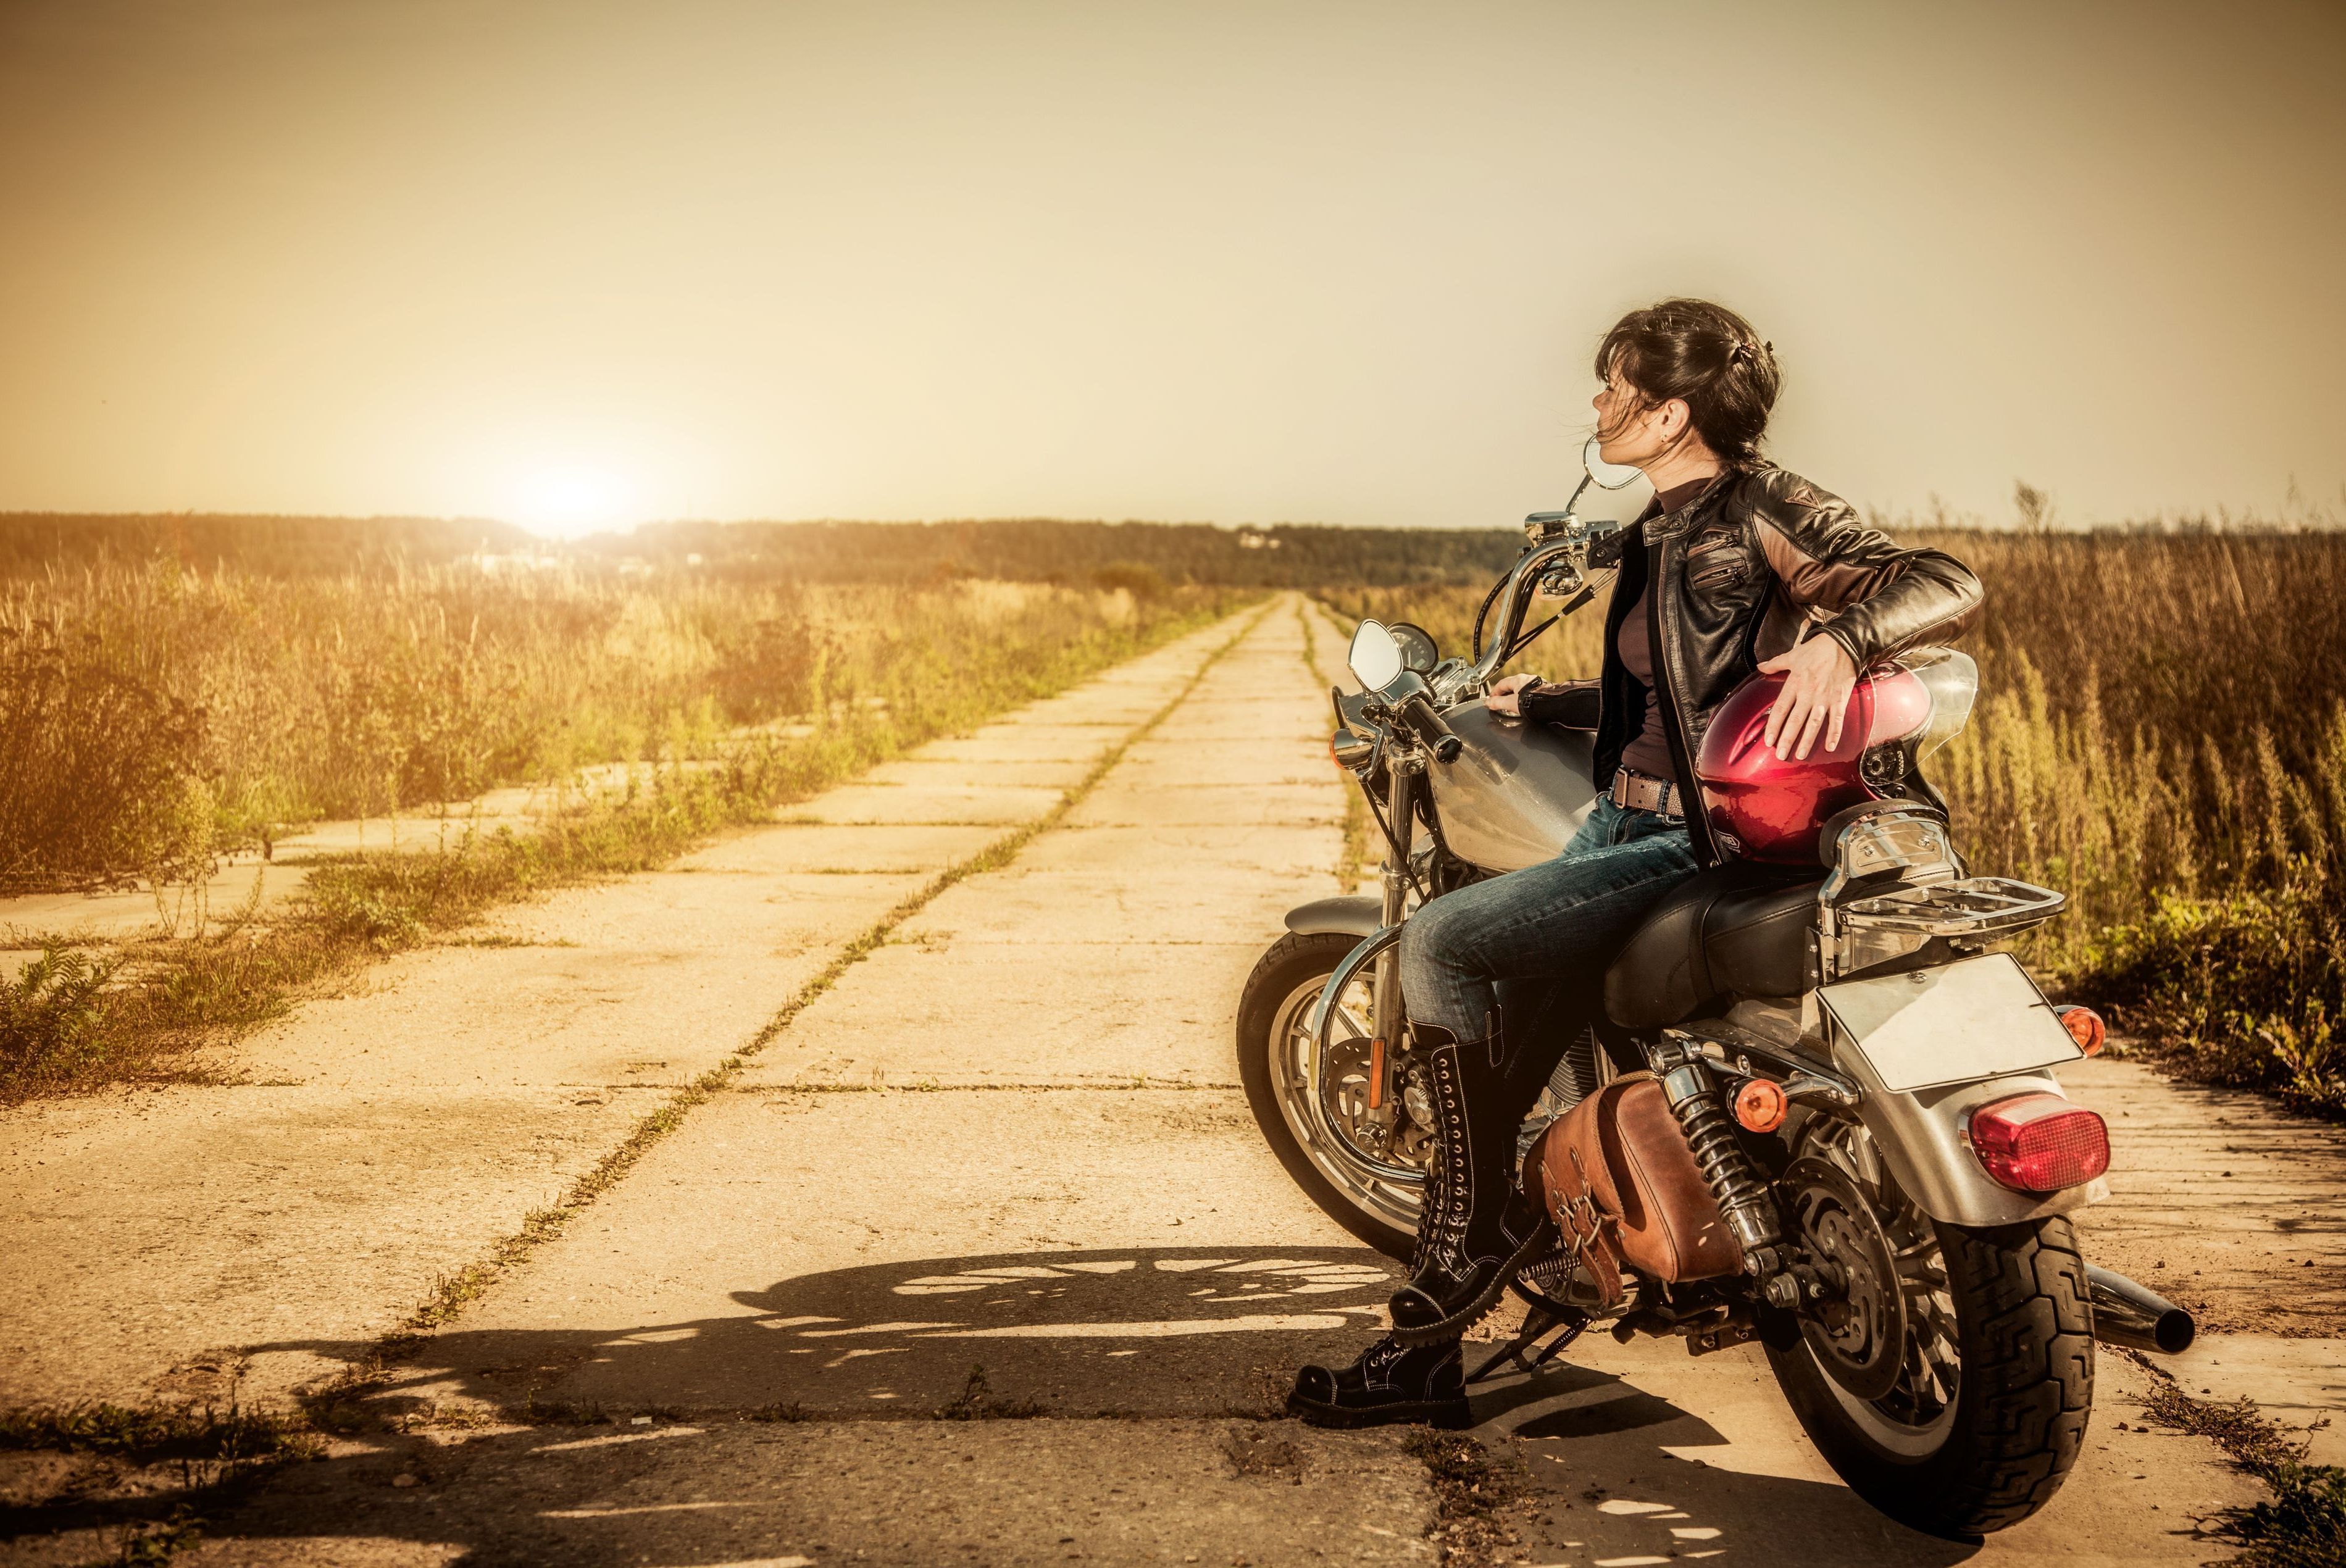 HD photo of girl biker, wallpaper of a trip on a motorcycle, road